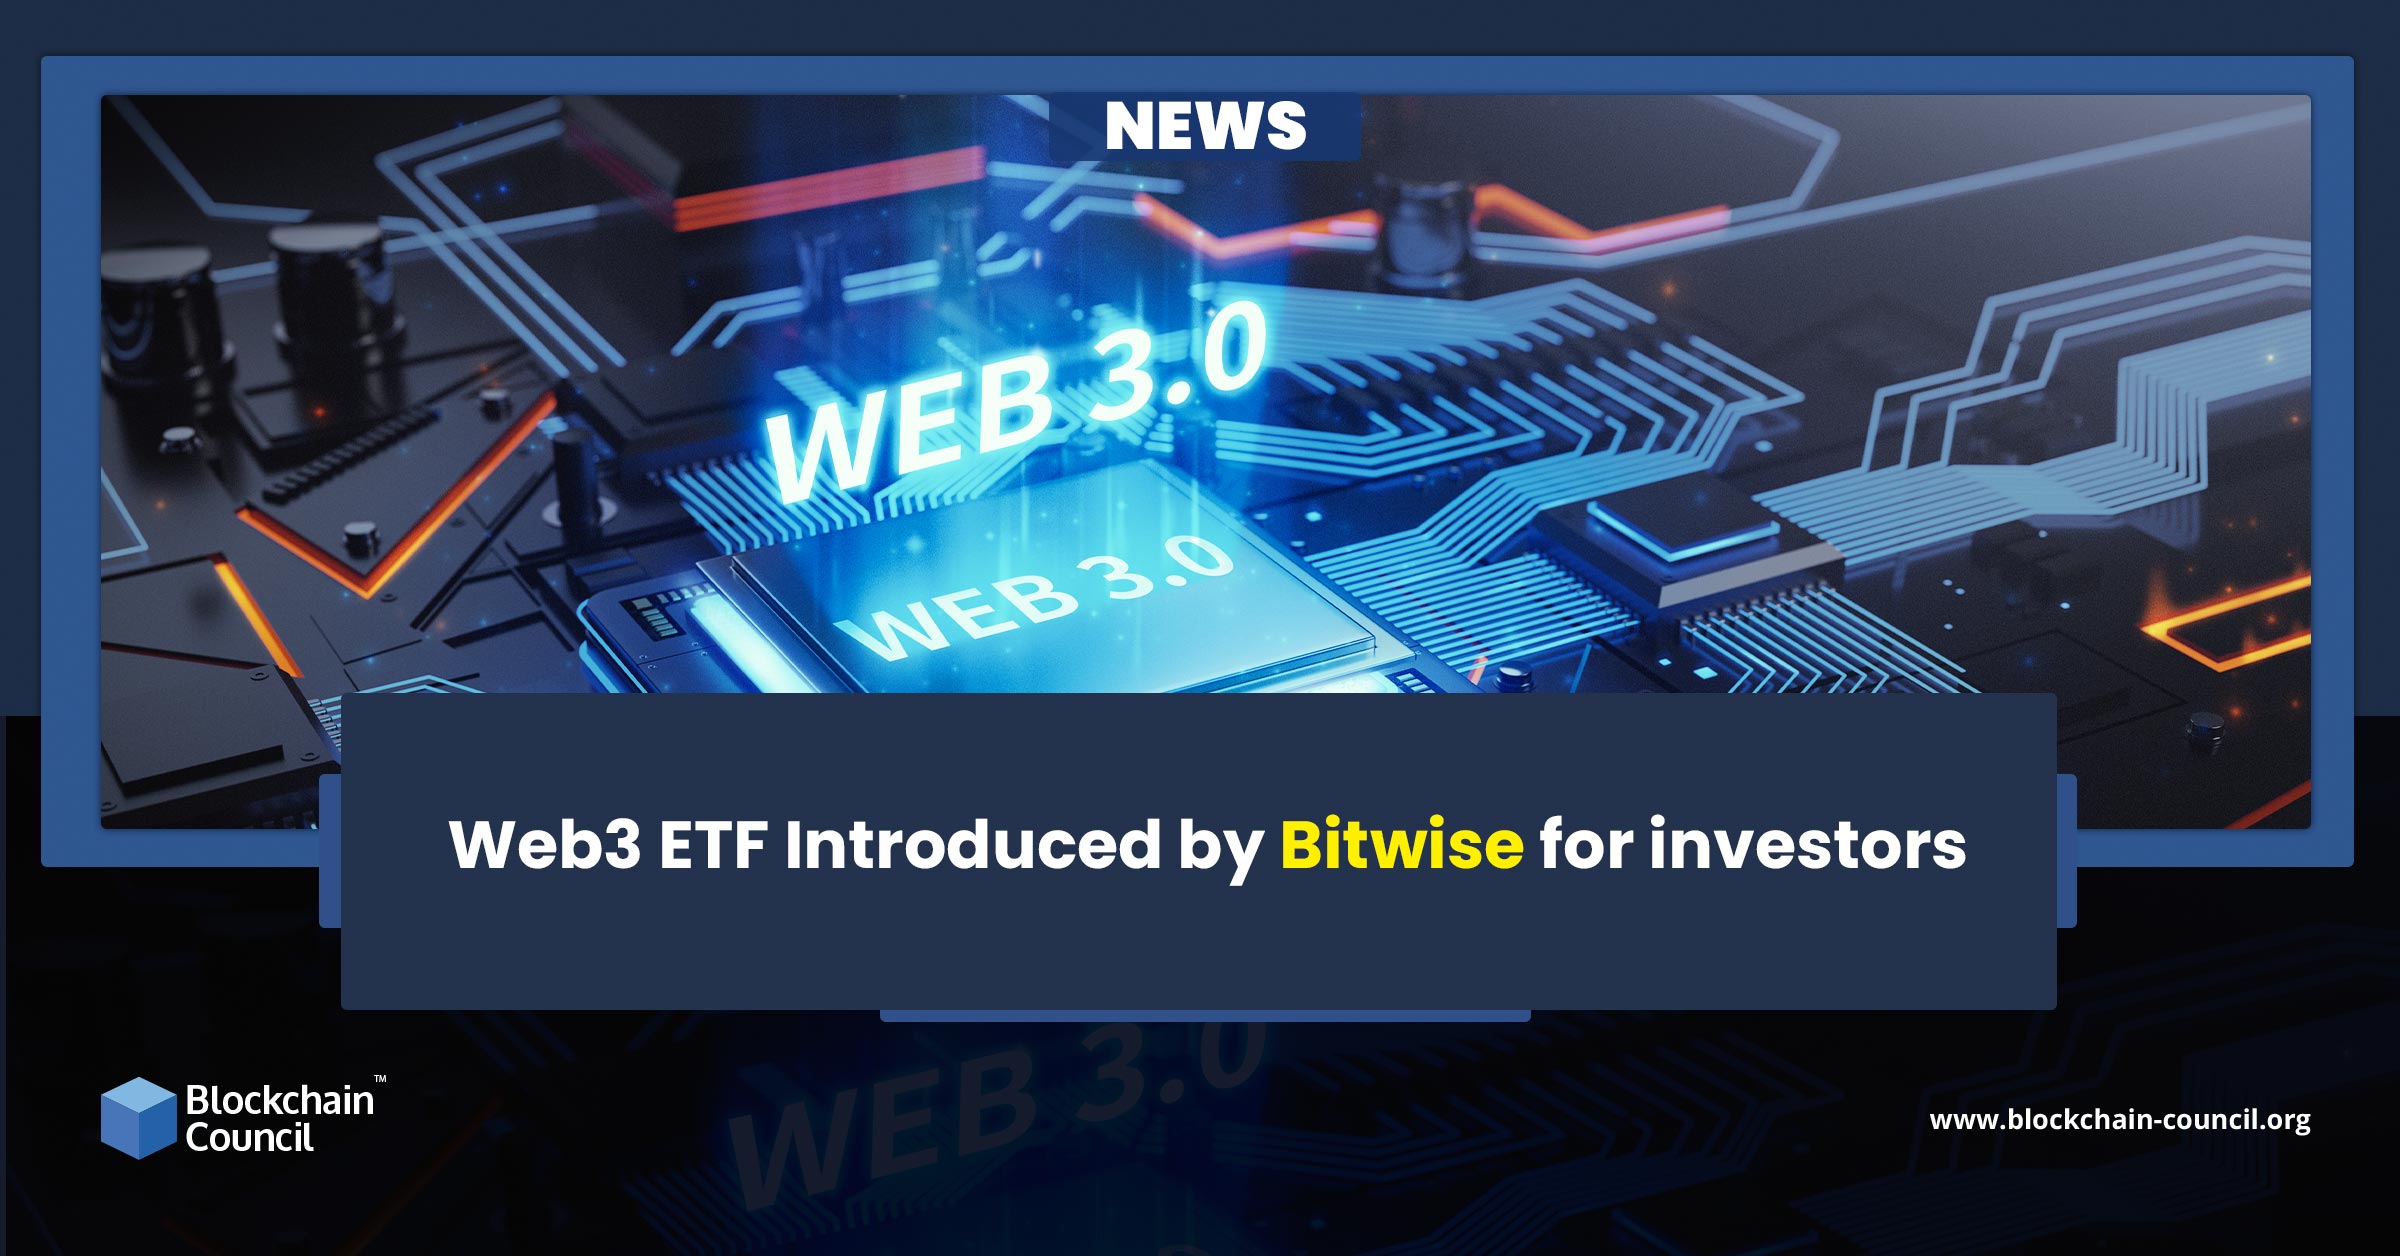 Web3 ETF introduce by Bitwise for investors